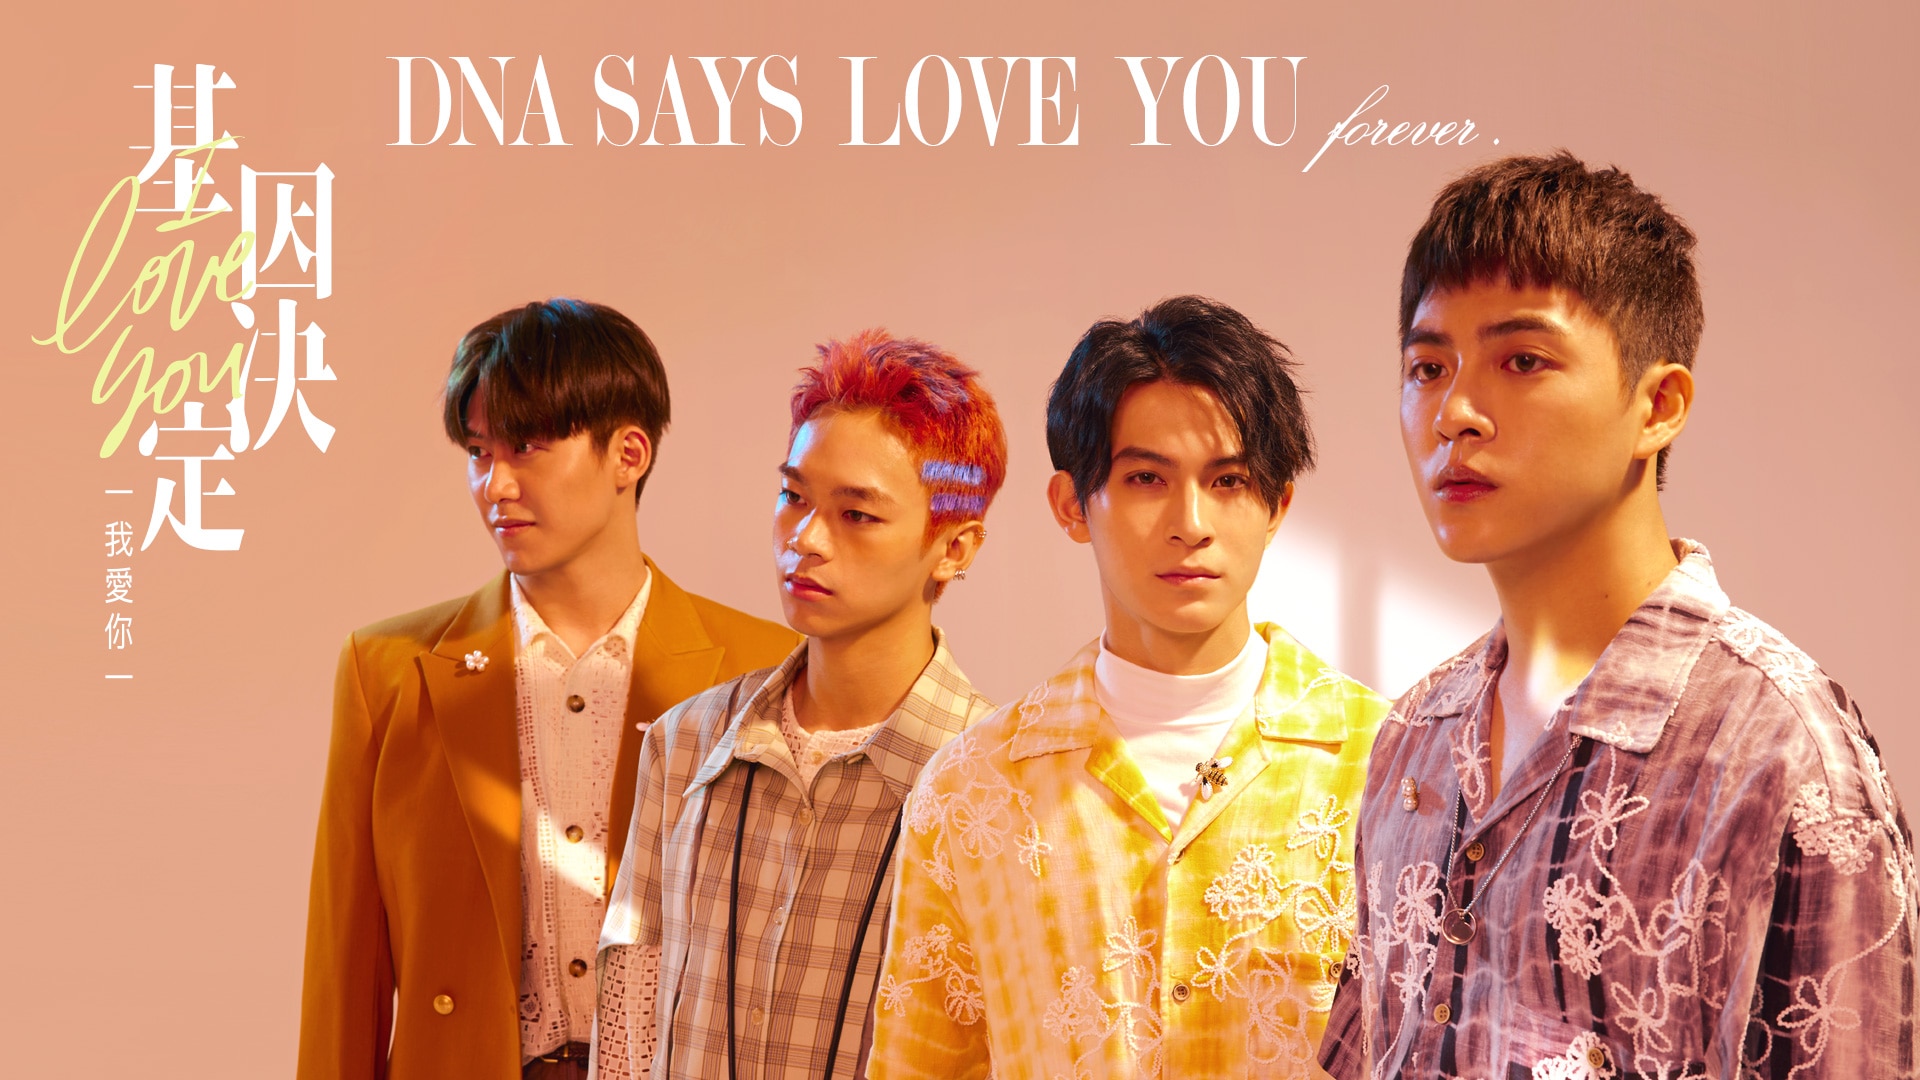 /special/dna-saysloveyou/